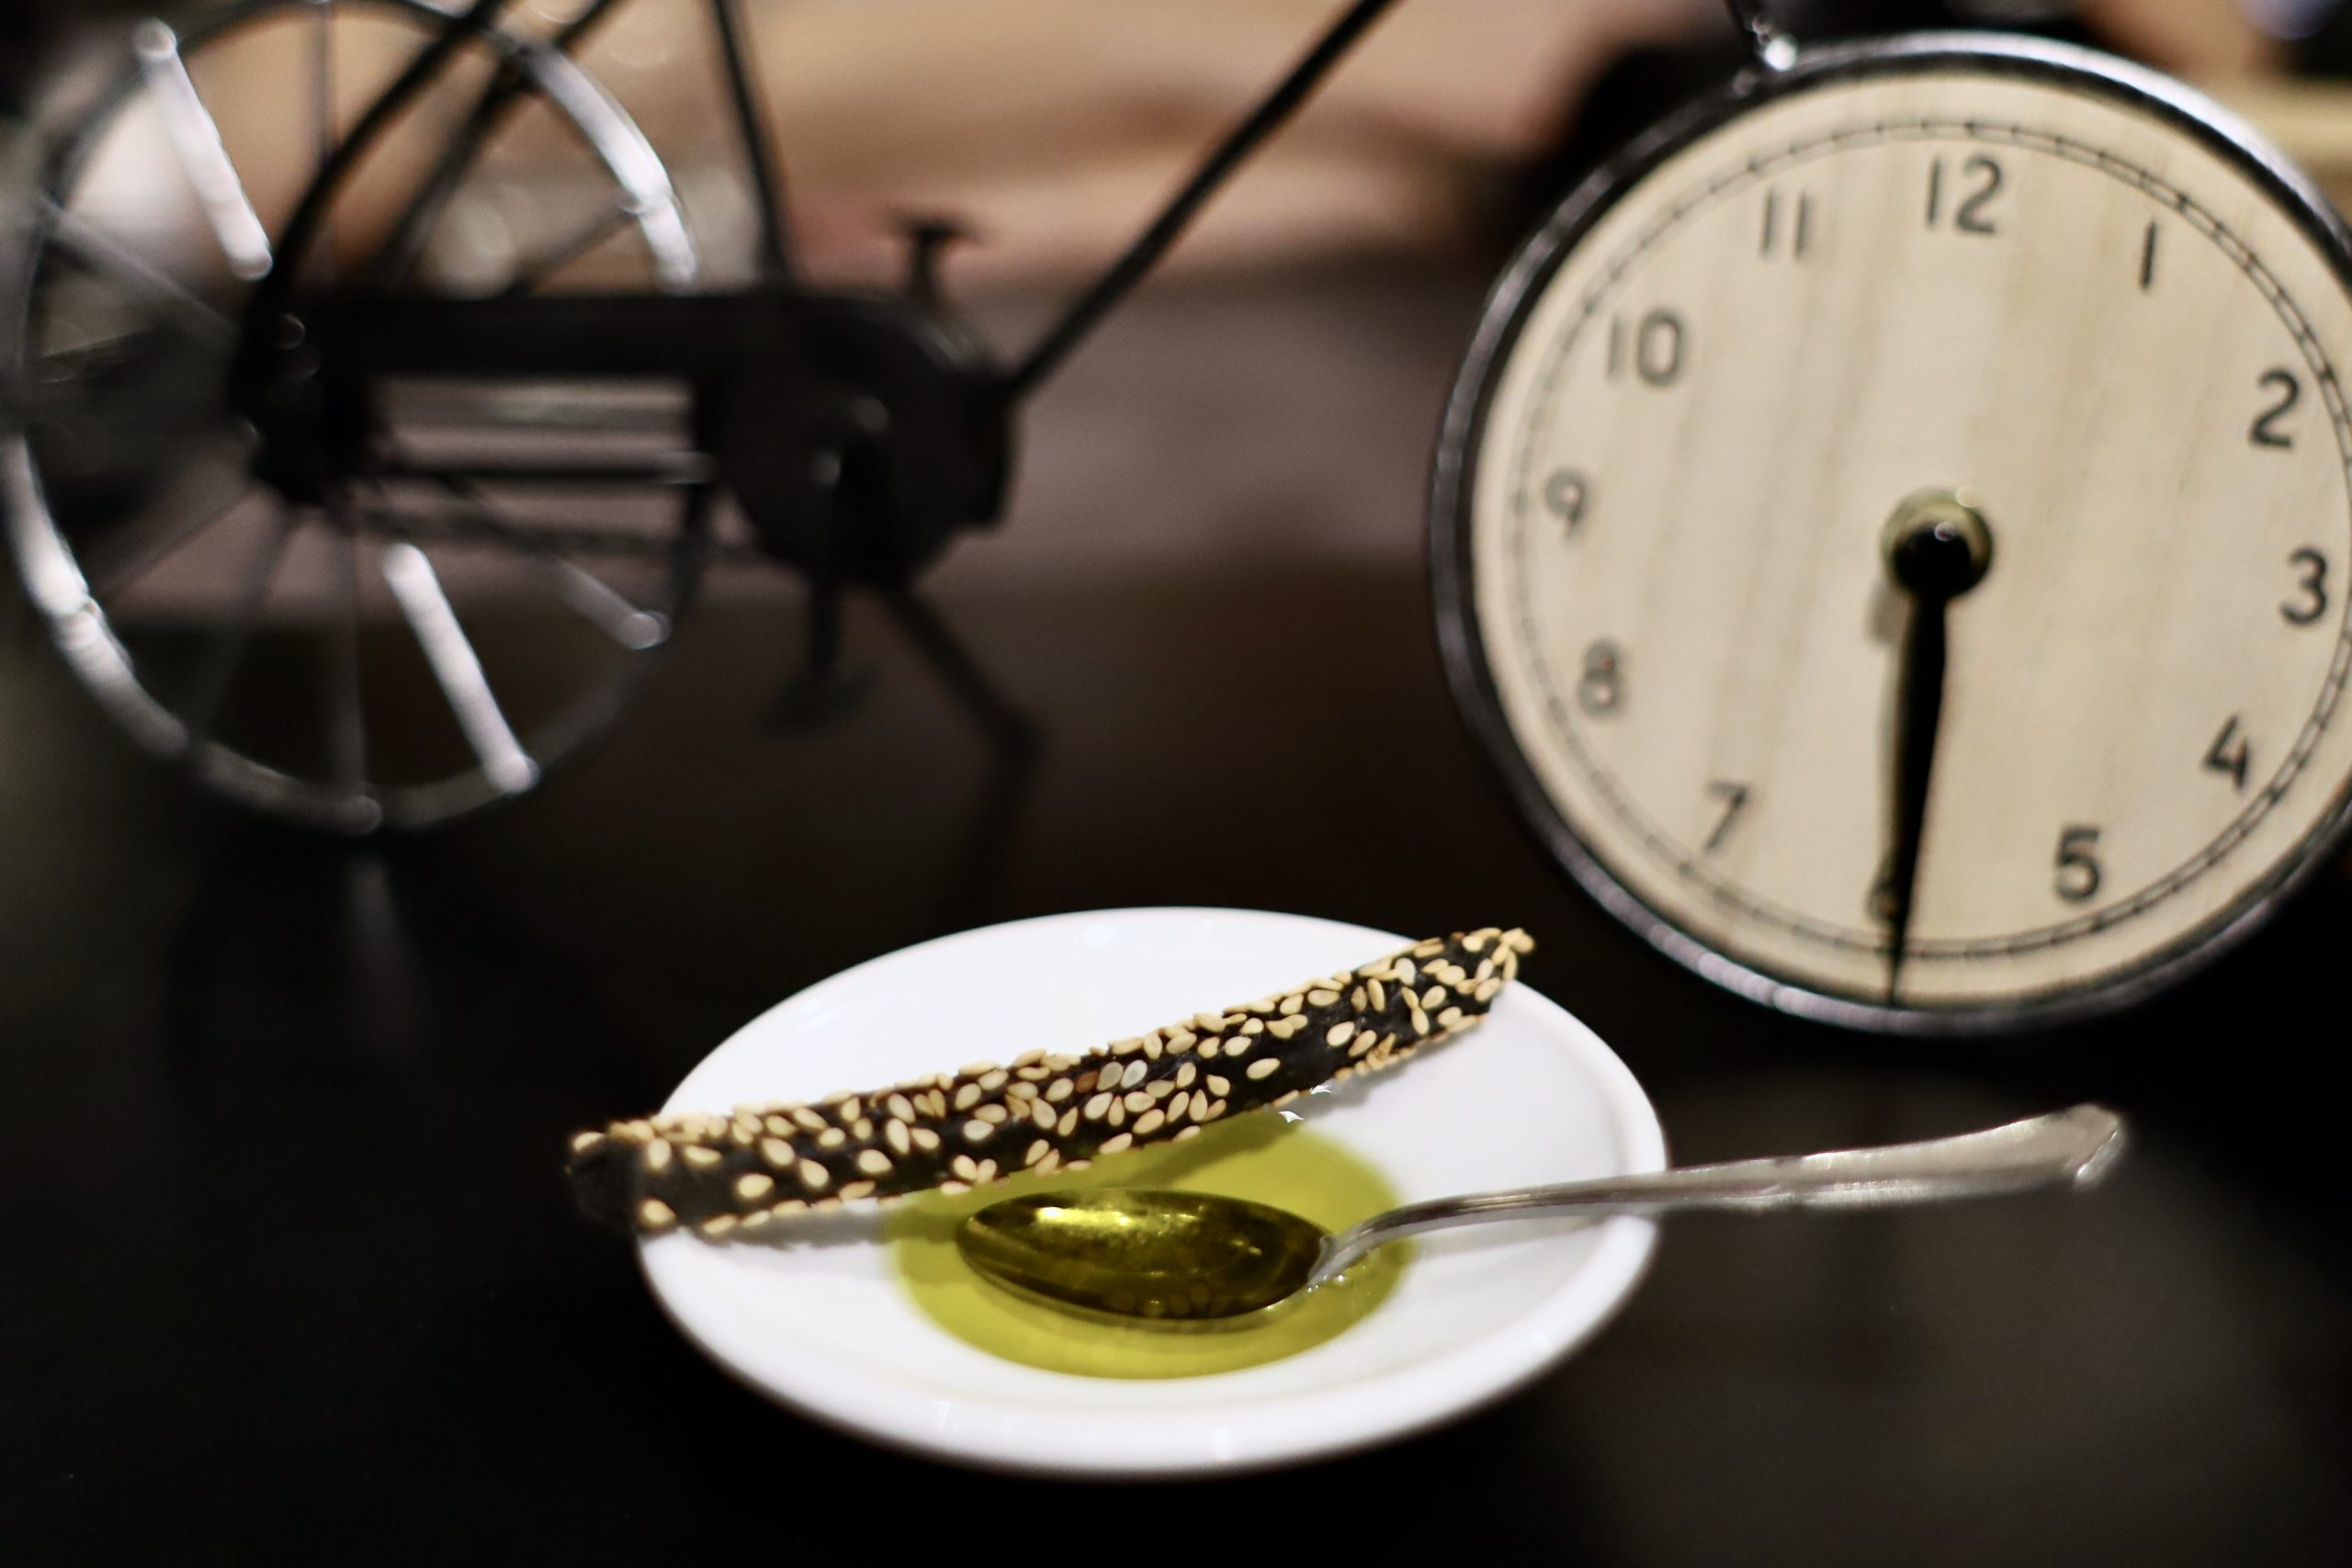 A perfect appetizer setup: black grissini (Italian breadsticks) with sesame seed and olive oil